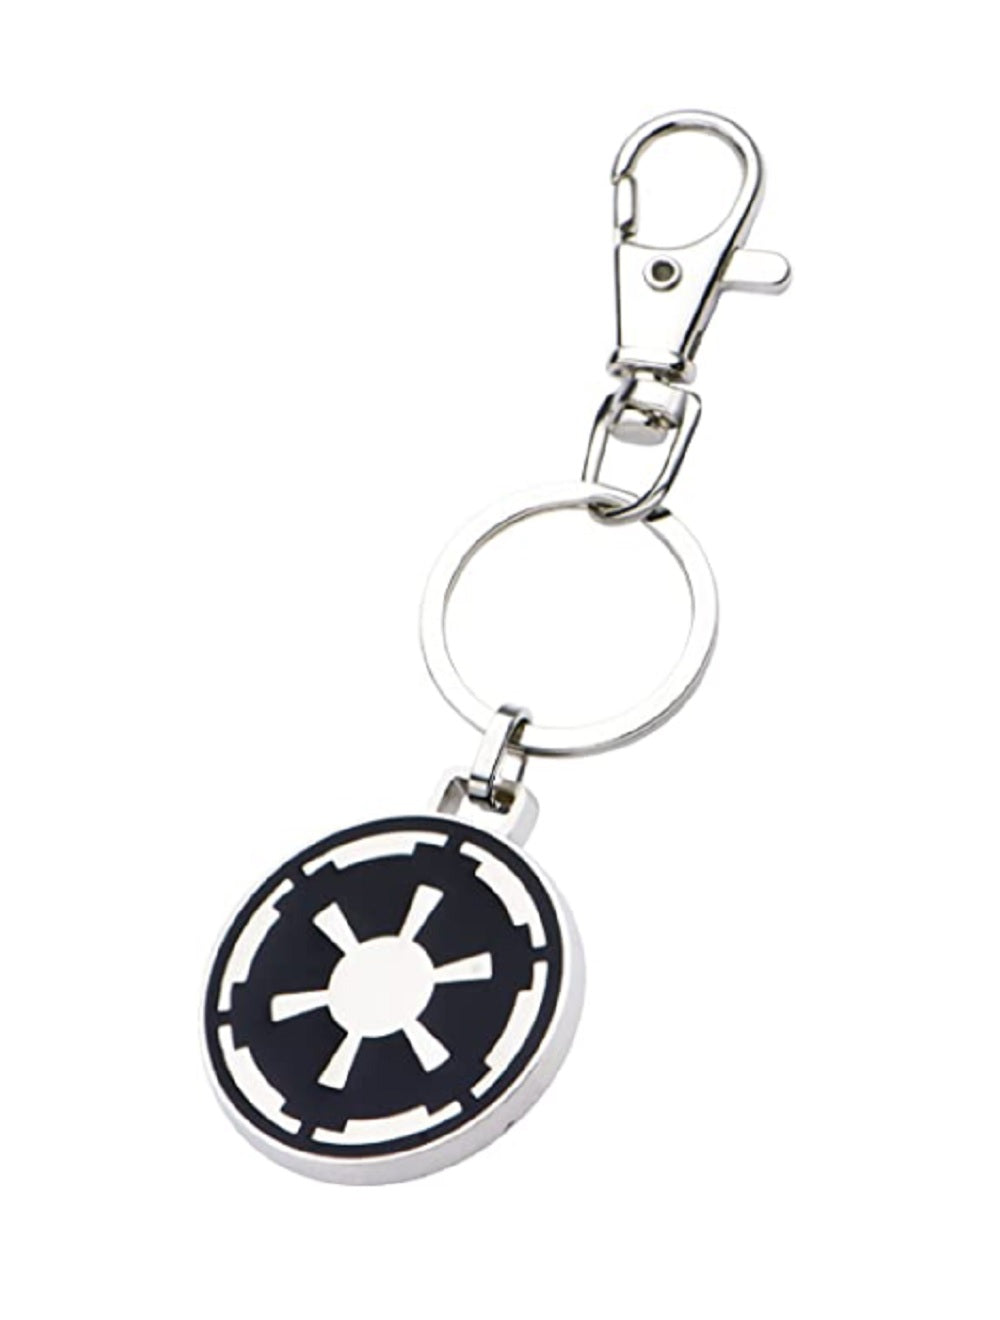 Star Wars Base Metal Imperial Symbol with Stainless Steel Key Chain